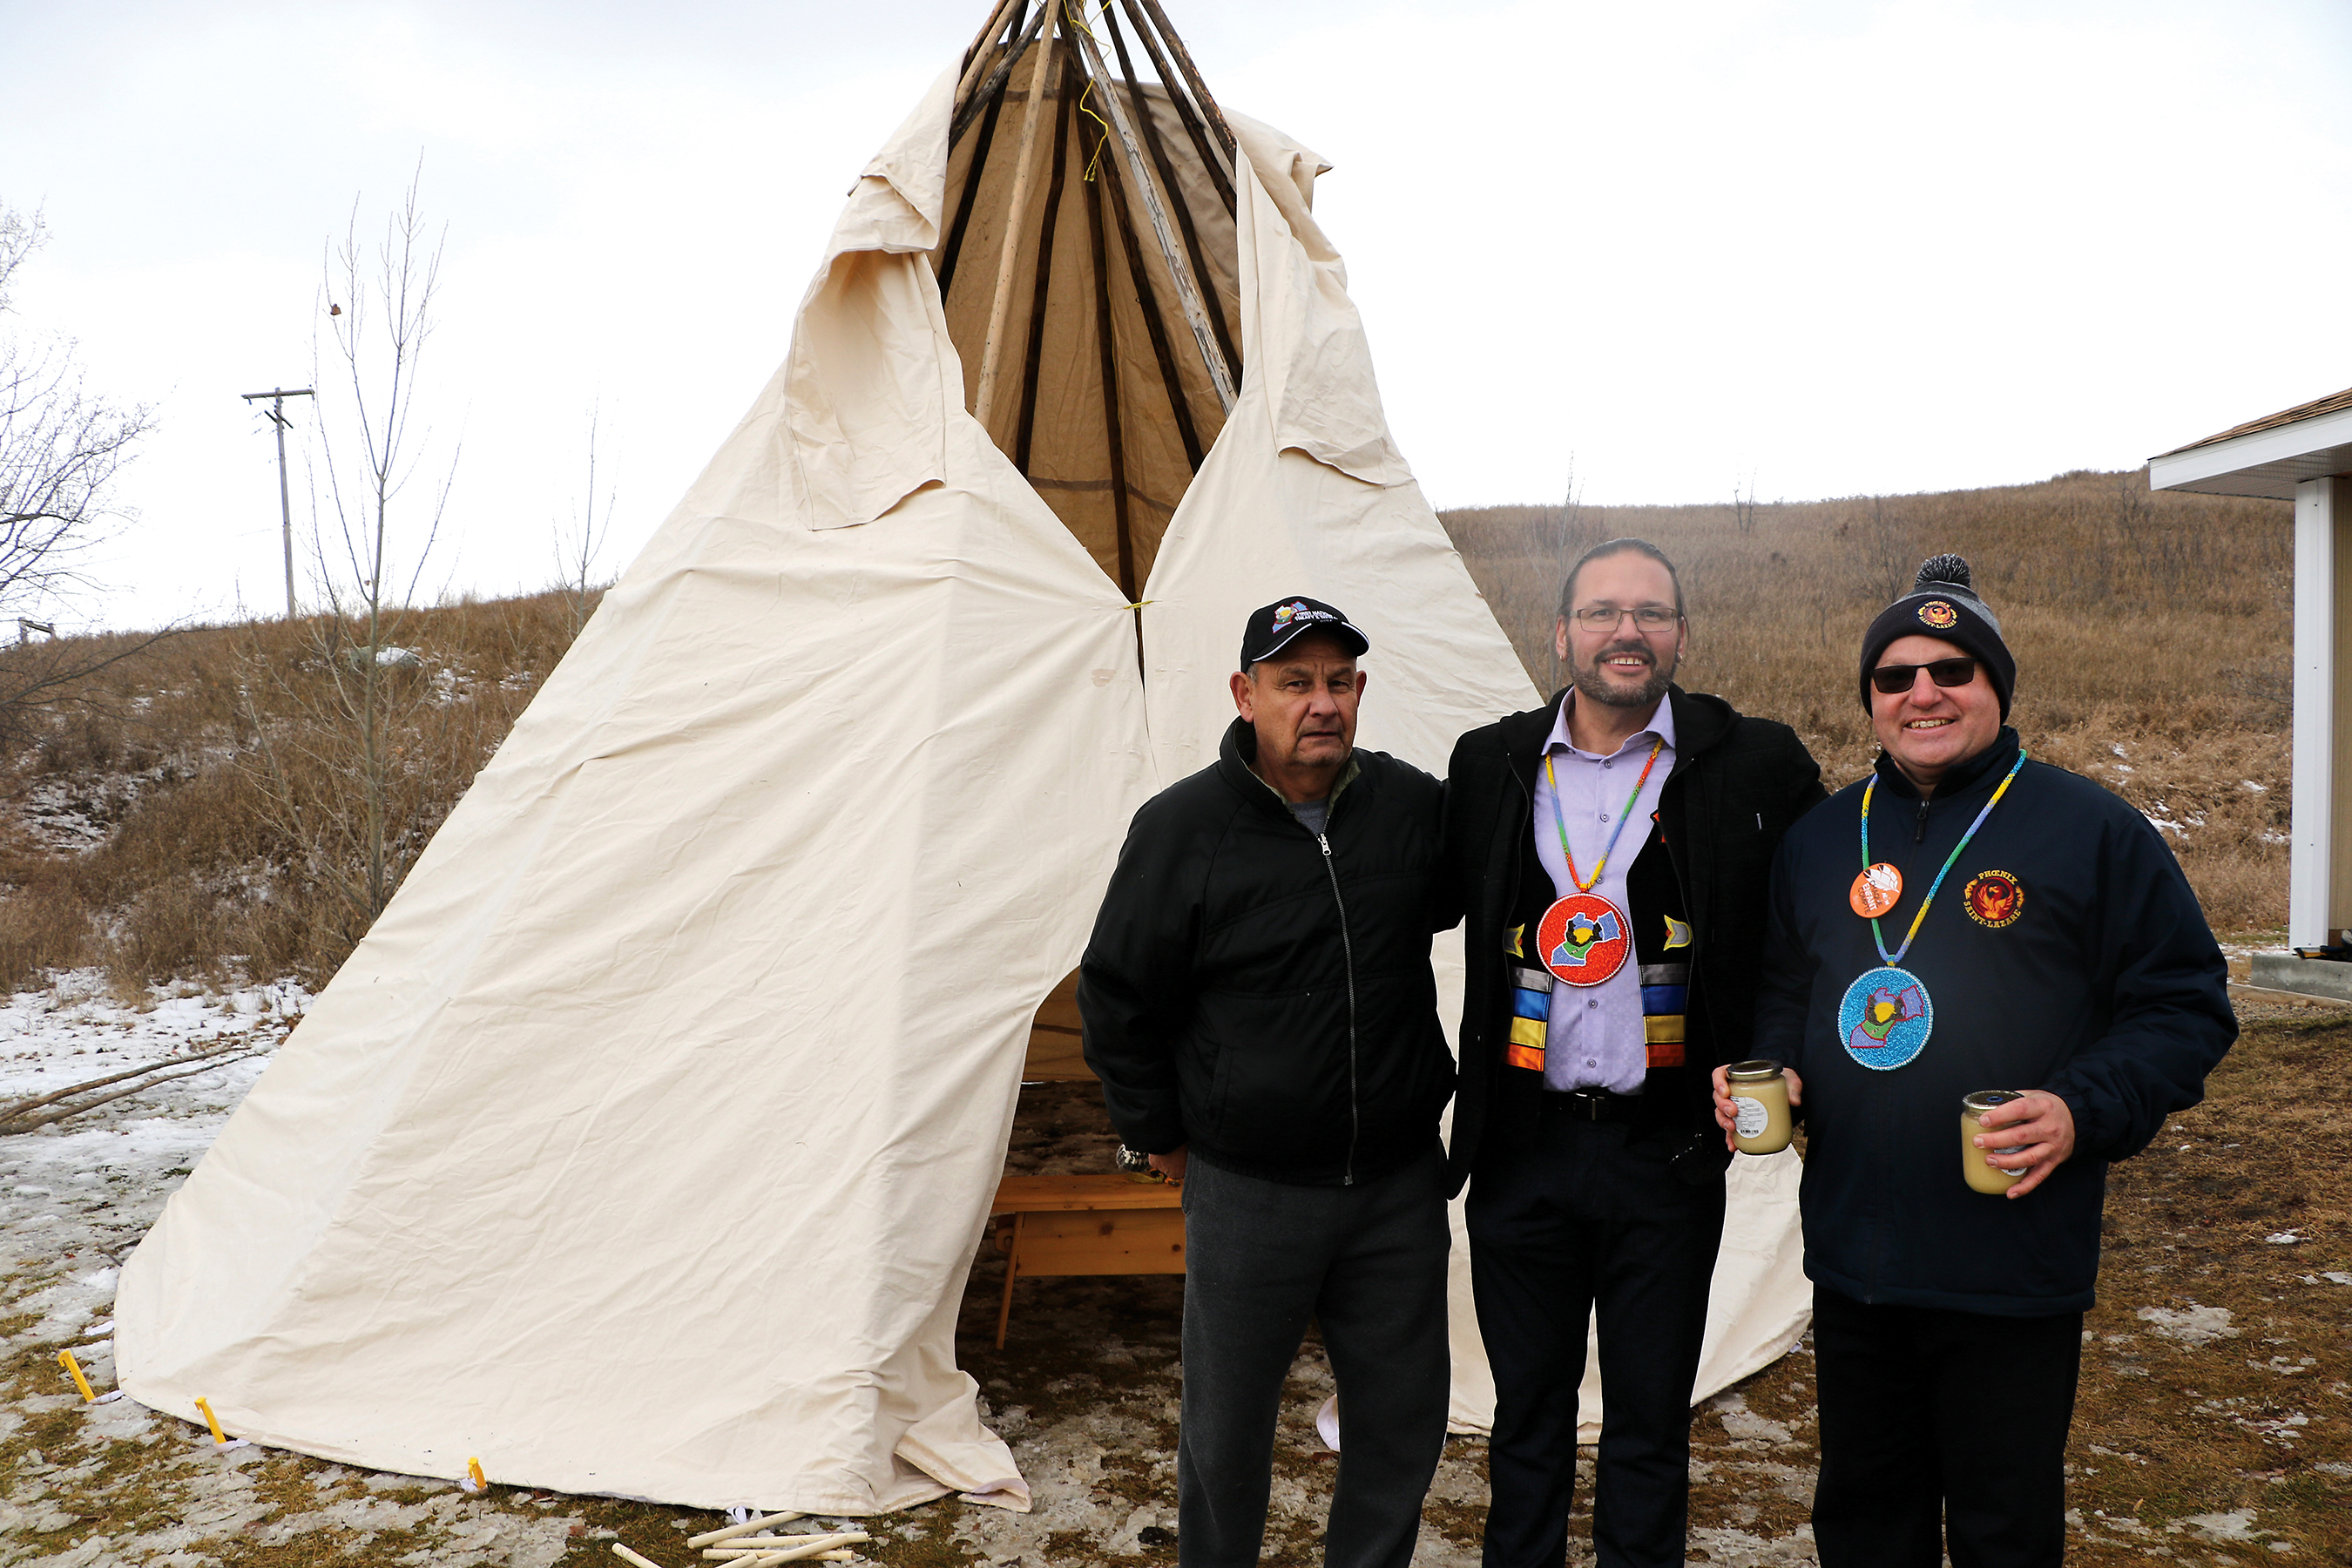 Terry Haney, president of the local MMF Fort-Ellice, Boh Kubrovich Lead Keeper and Richard Fiola, principal of École Saint-Lazare, stand by the finished tipi on Tuesday.